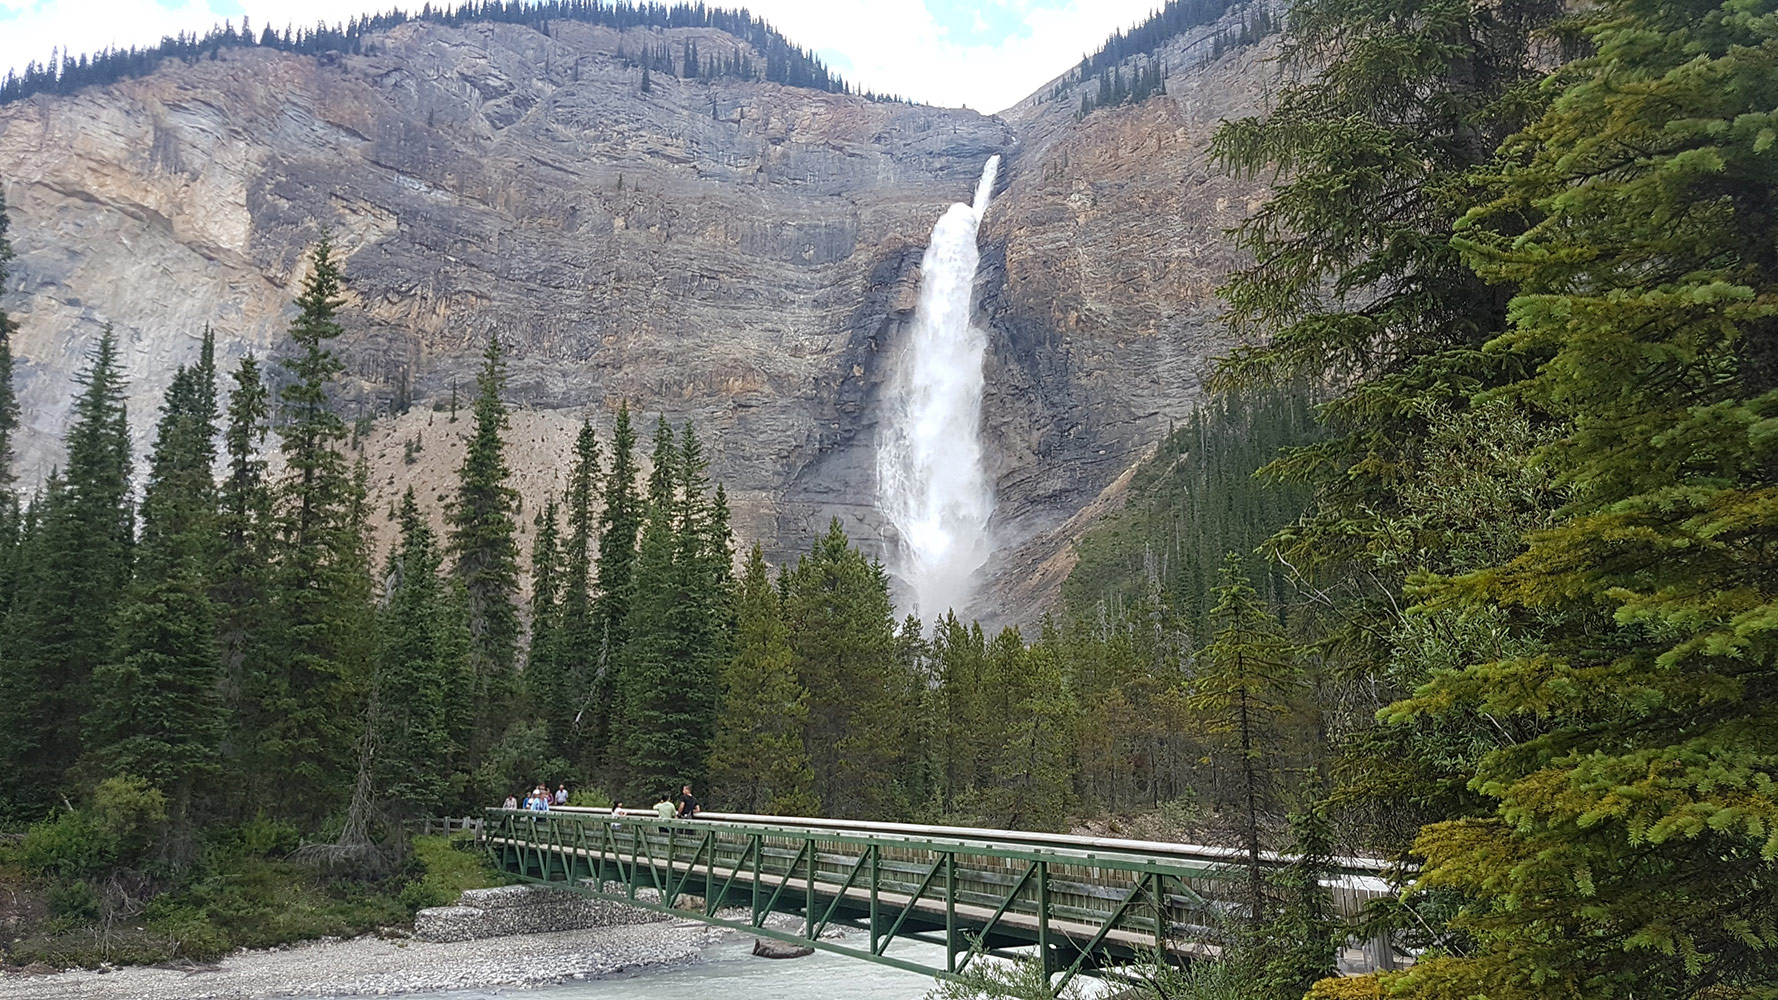 After hiring a one-way car rental from Vancouver to Calgary, we looked for the top things to do along the way. We chose to explore the stunning Takkakaw Falls.